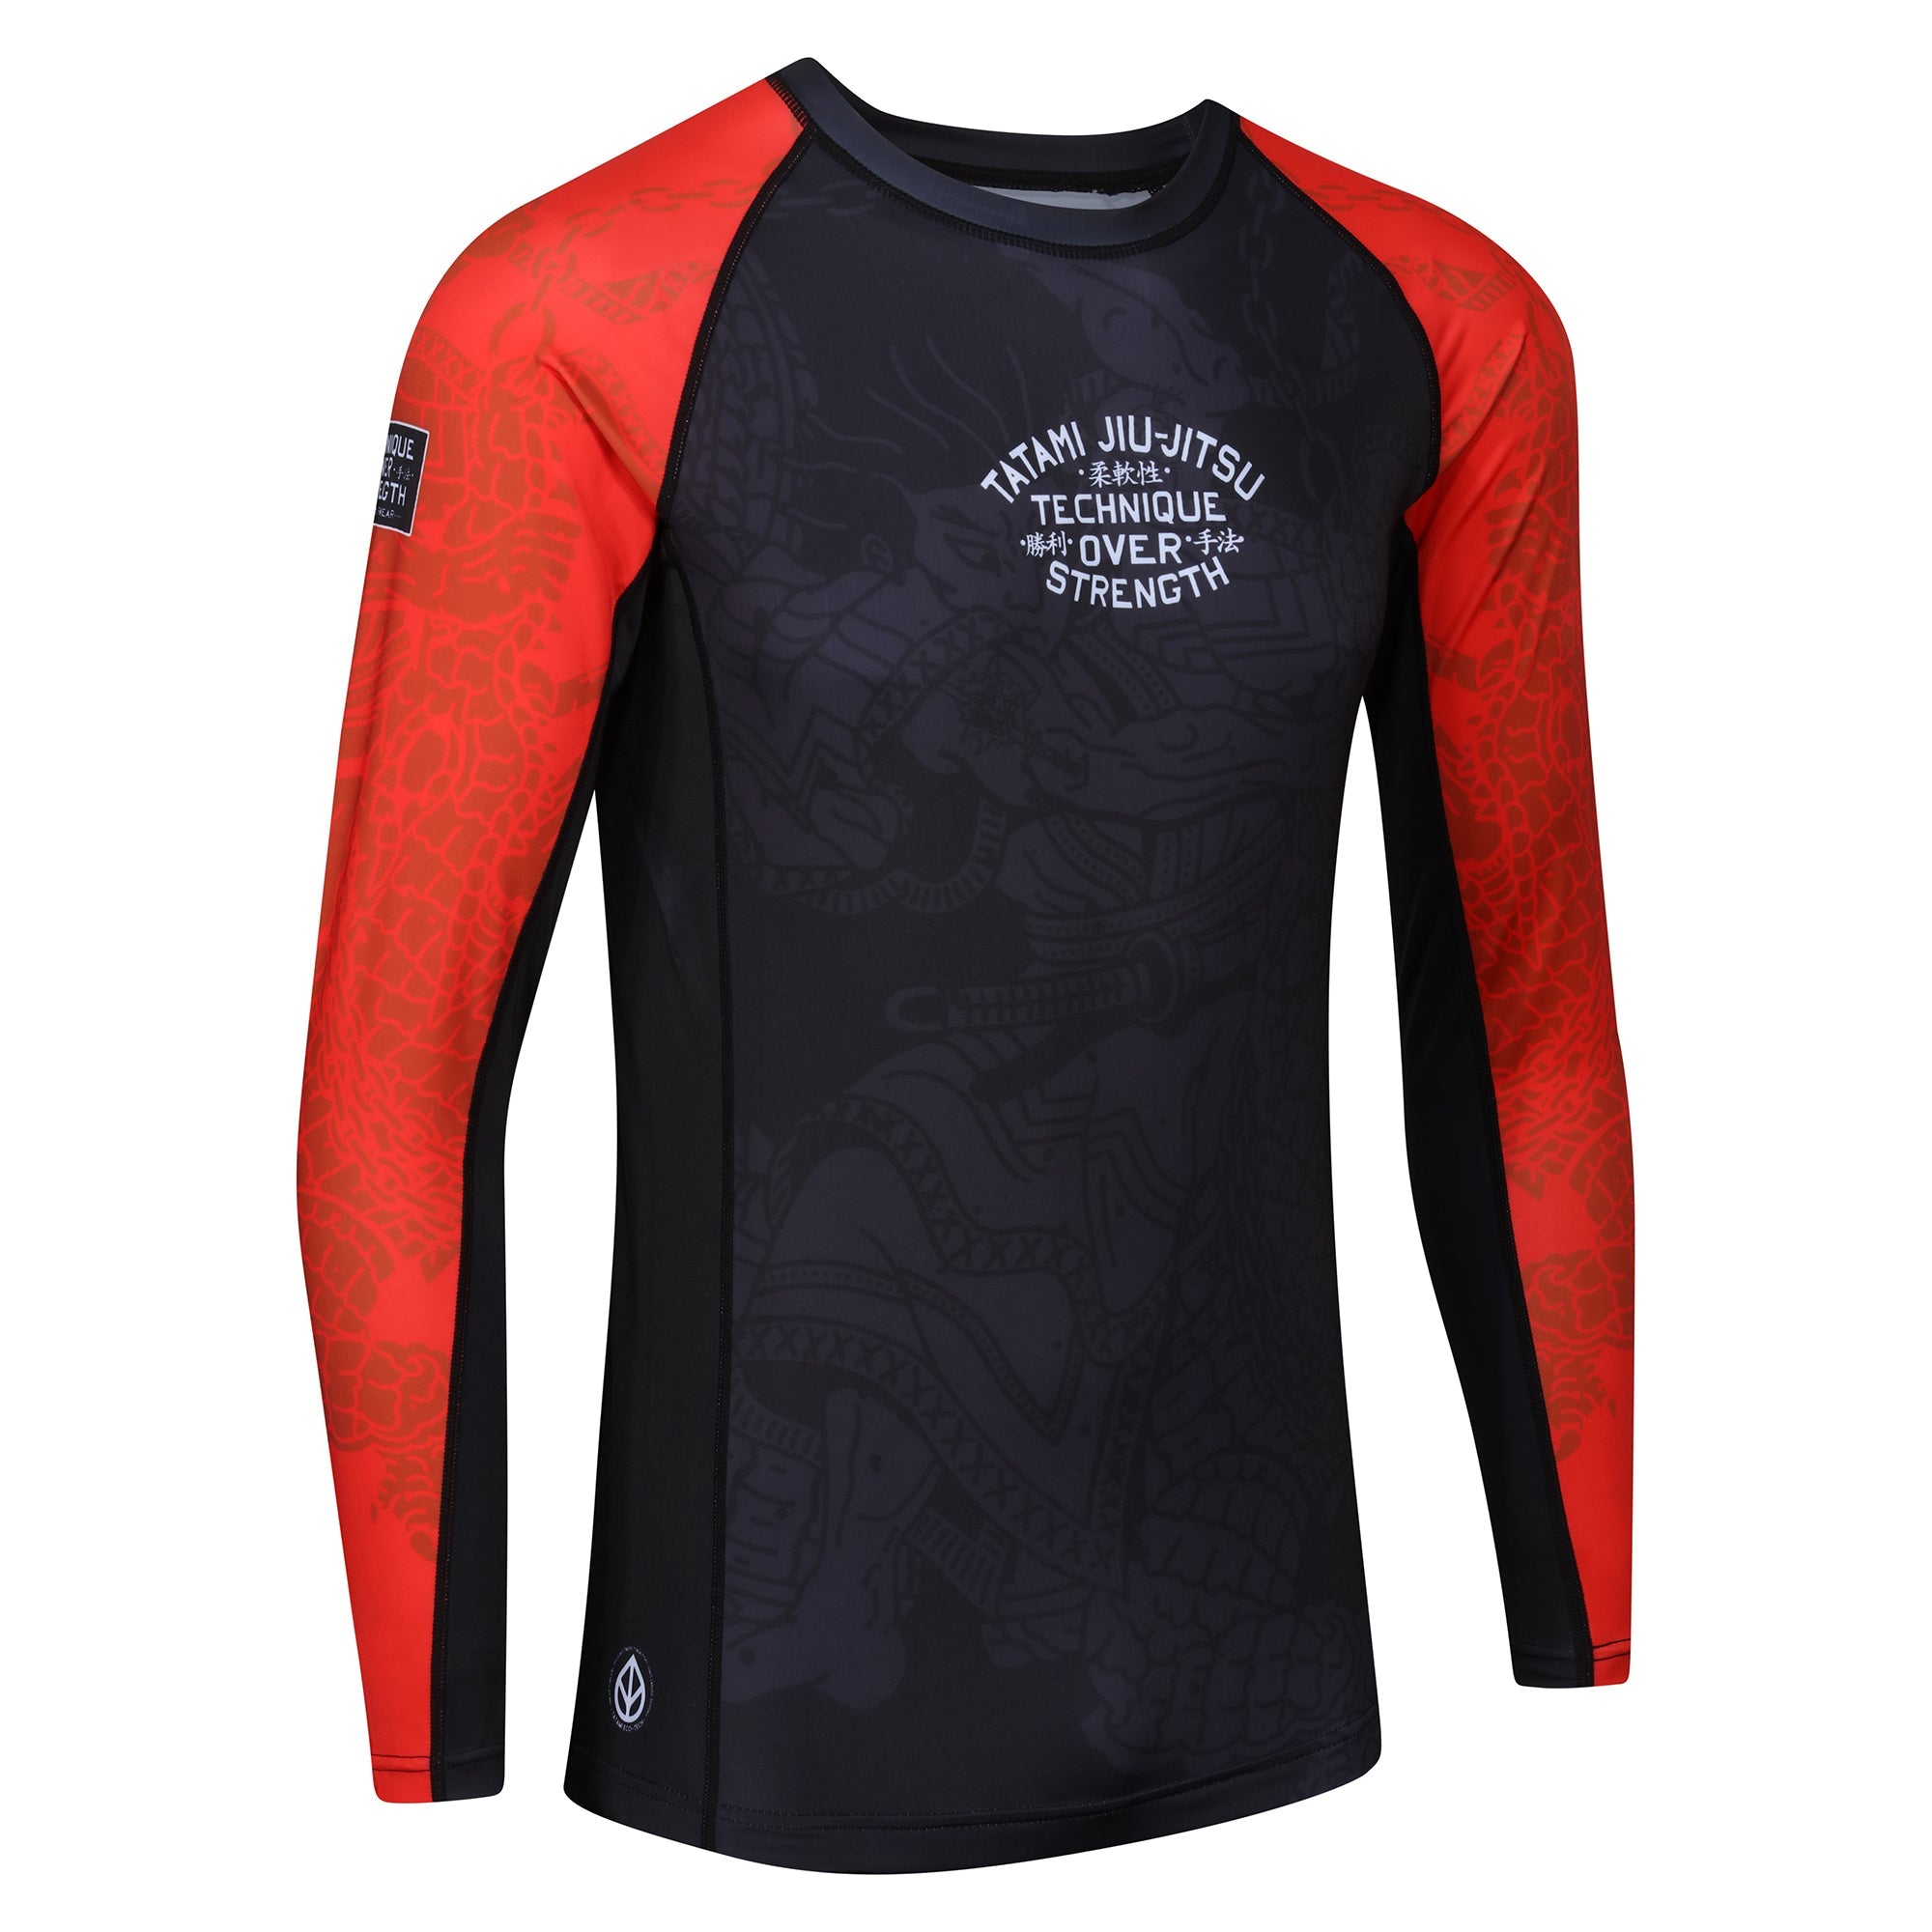 TATAMI Technique Eco Tech Recycled Long Sleeve Rash Guard - Red